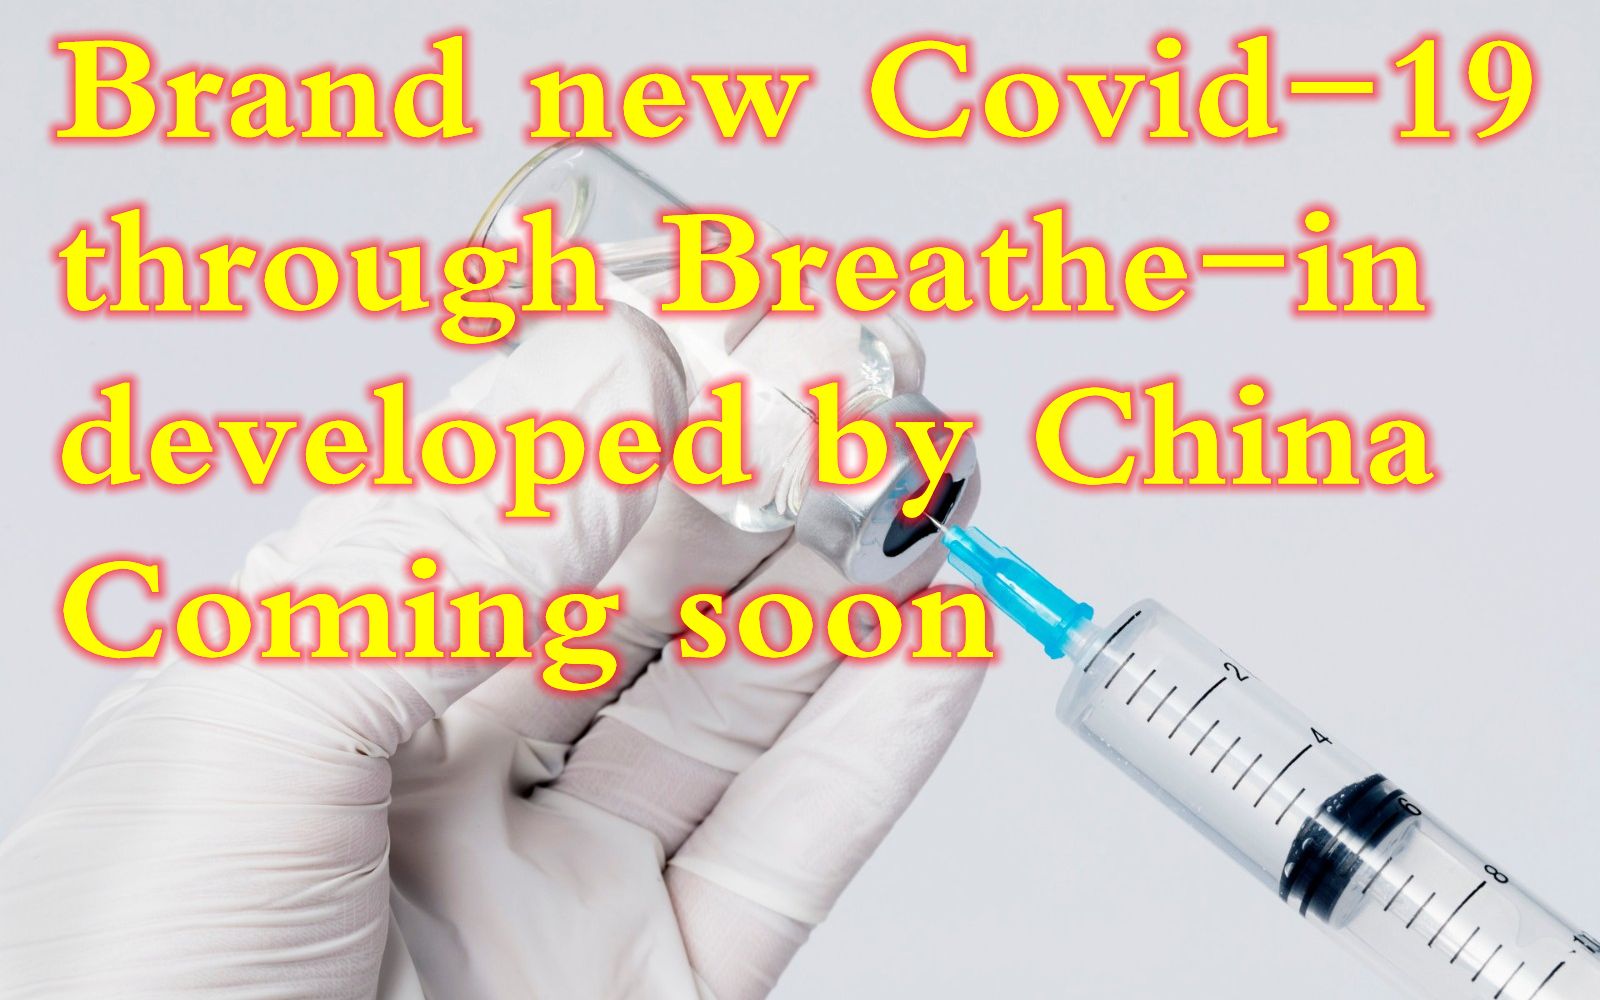 Breathe-in vapourised Covid-19 vaccine by Chen Wei Team of China